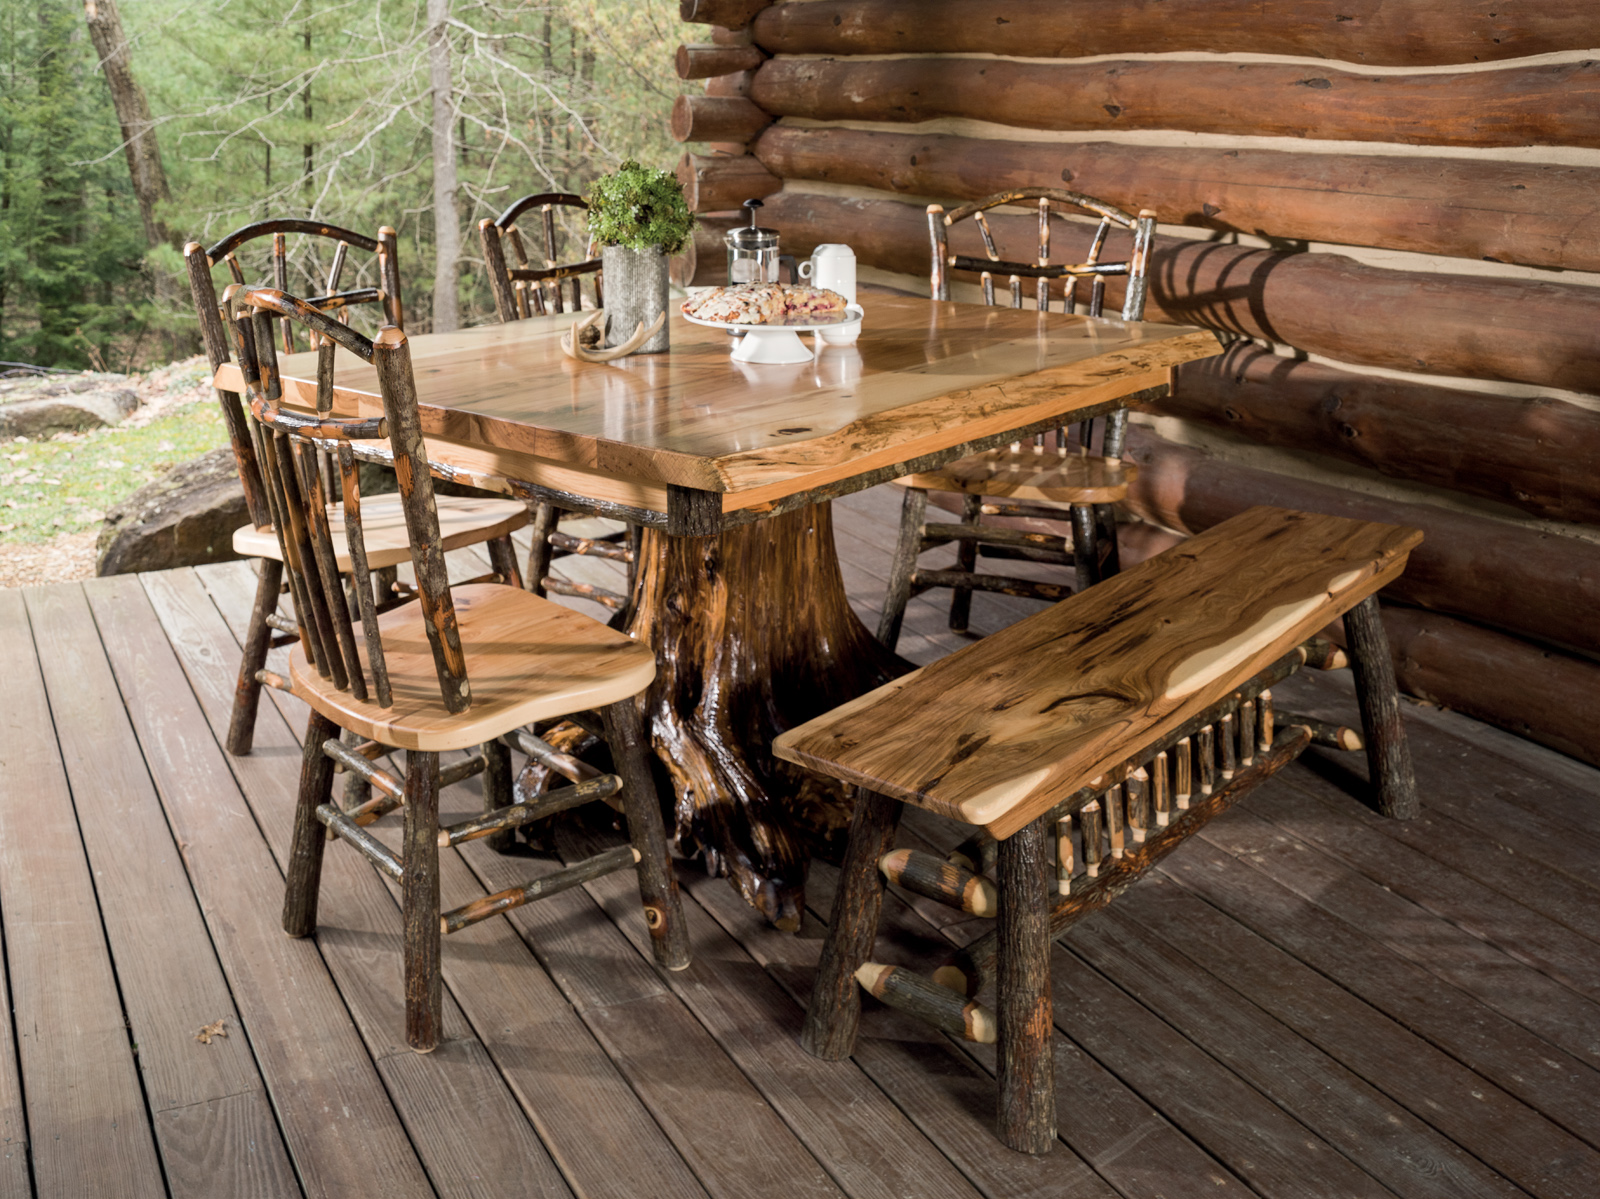 Hickory Collection Stump Table Set with a square stump table, side chairs, and a bench